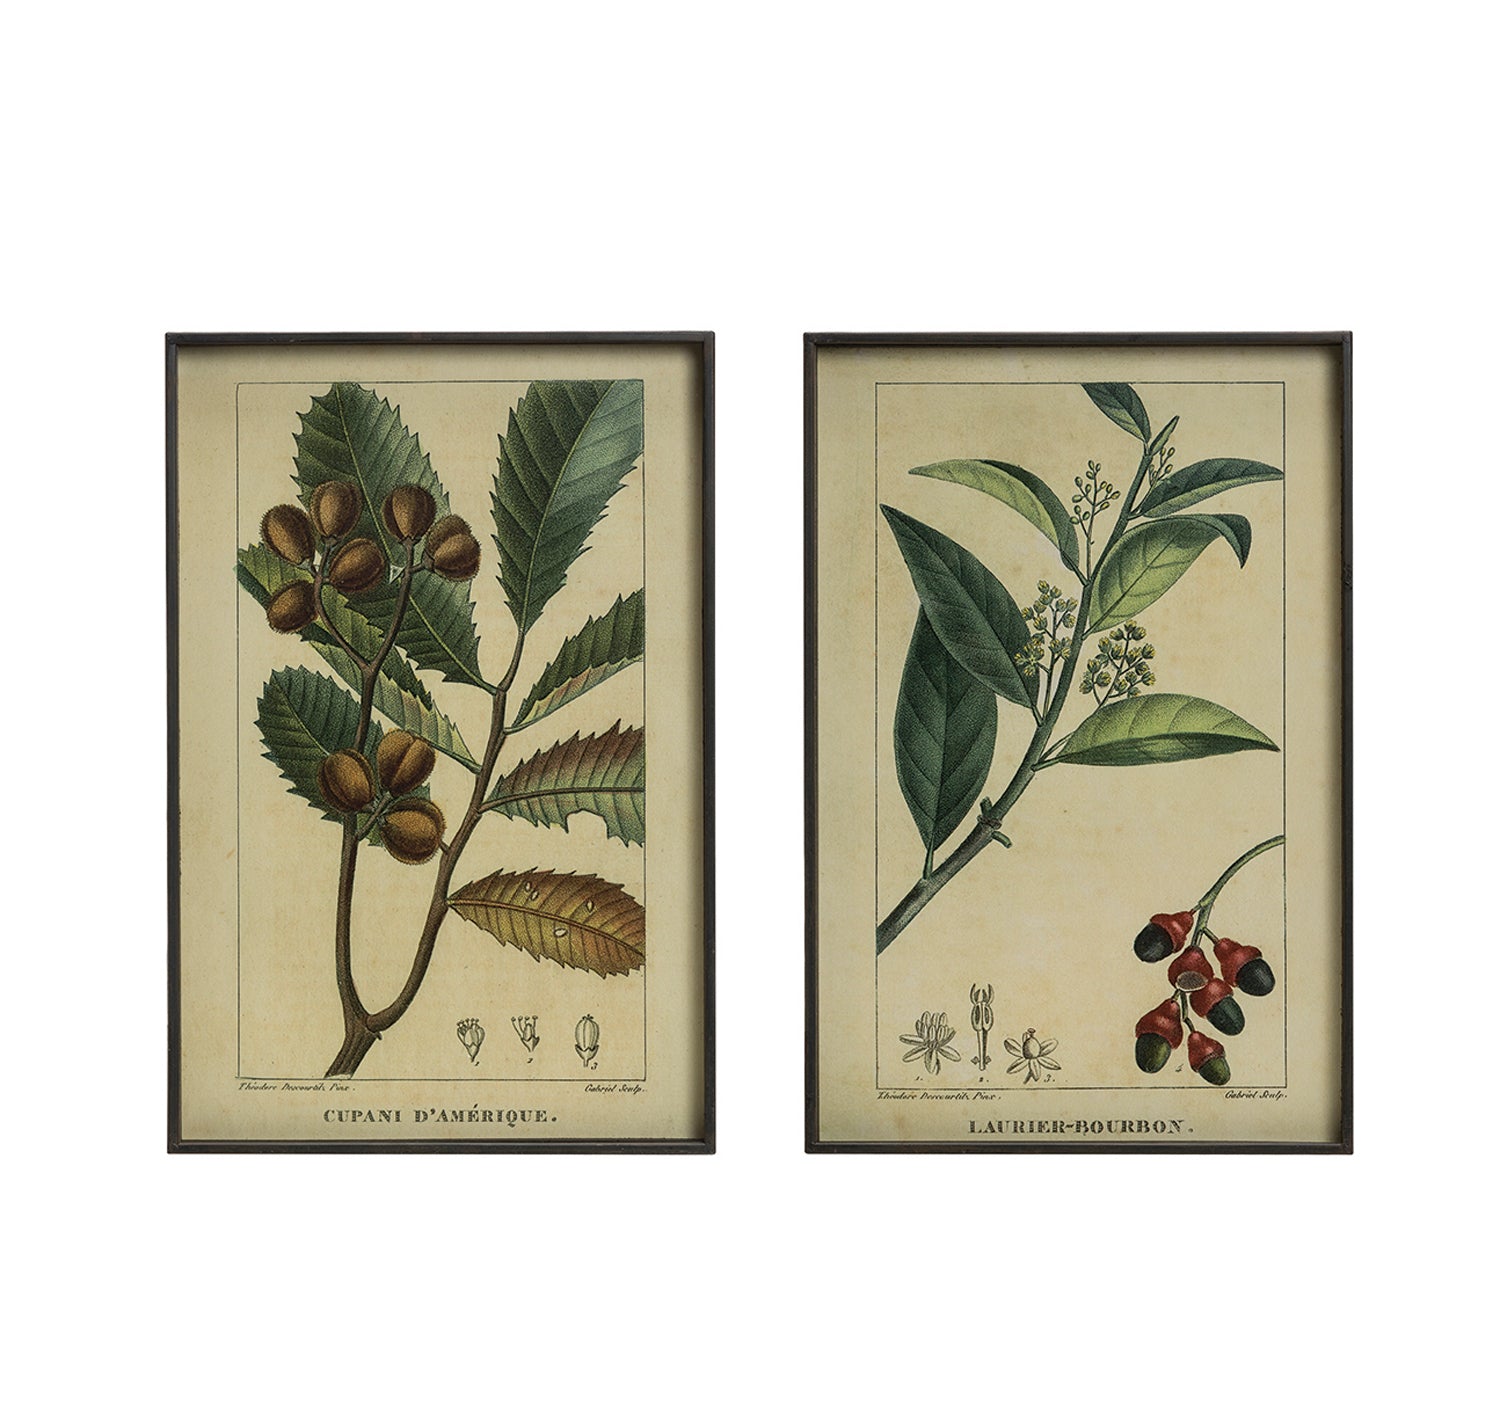 15"W x 23-1/2"H Metal Framed Wall Décor w/ Vintage Reproduction Botanical Print, 2 Styles, Truck Ship